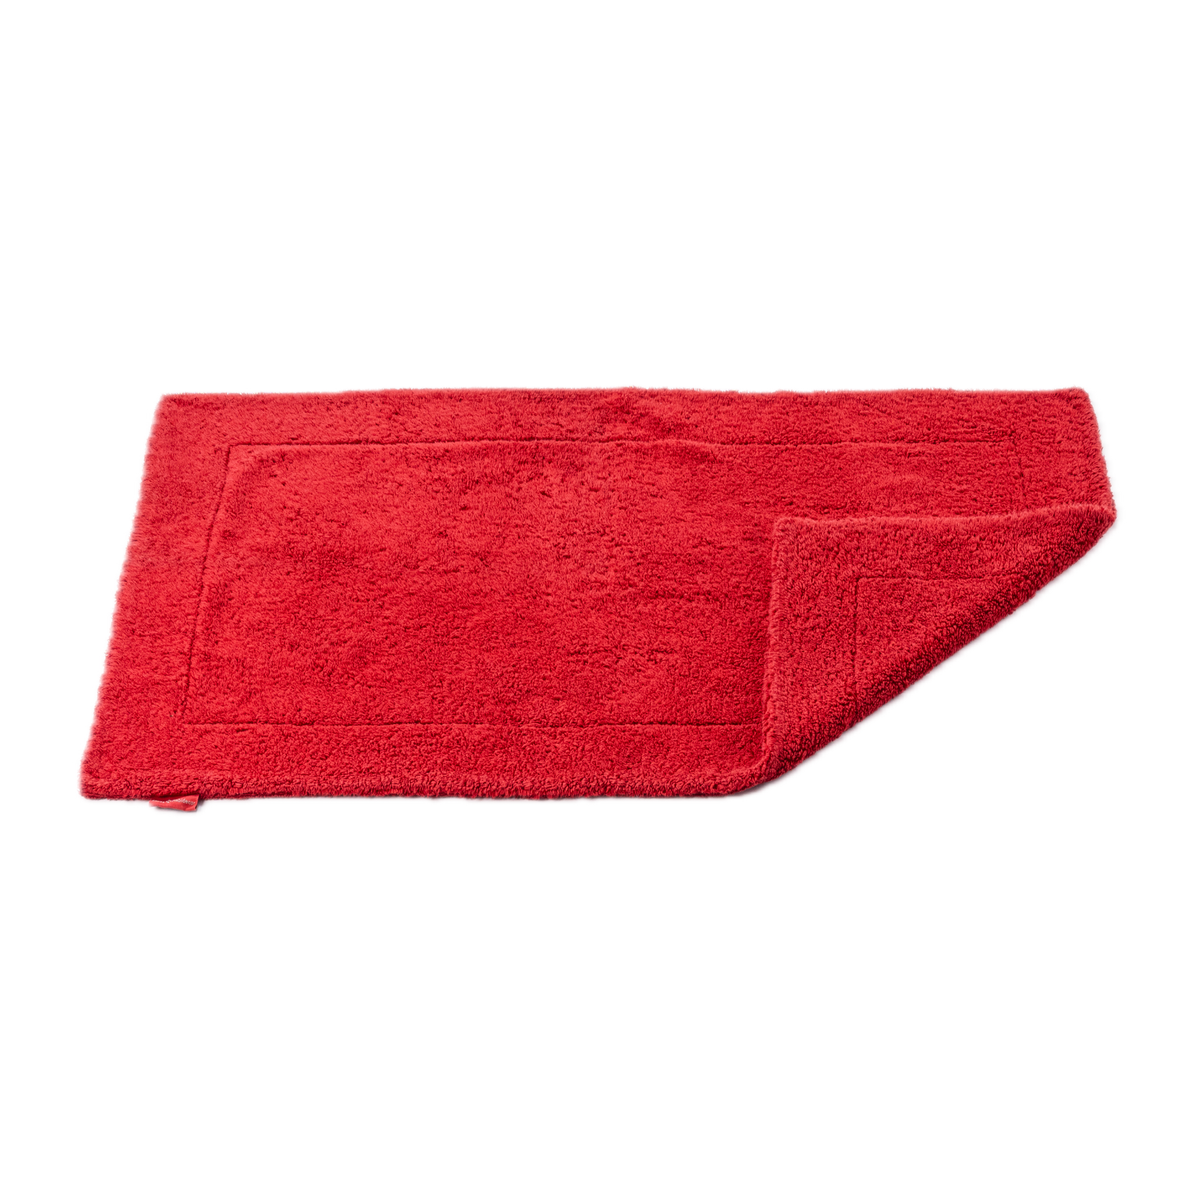 Abyss Double Bath Tub Mat in Carmin (564) Color with Fold